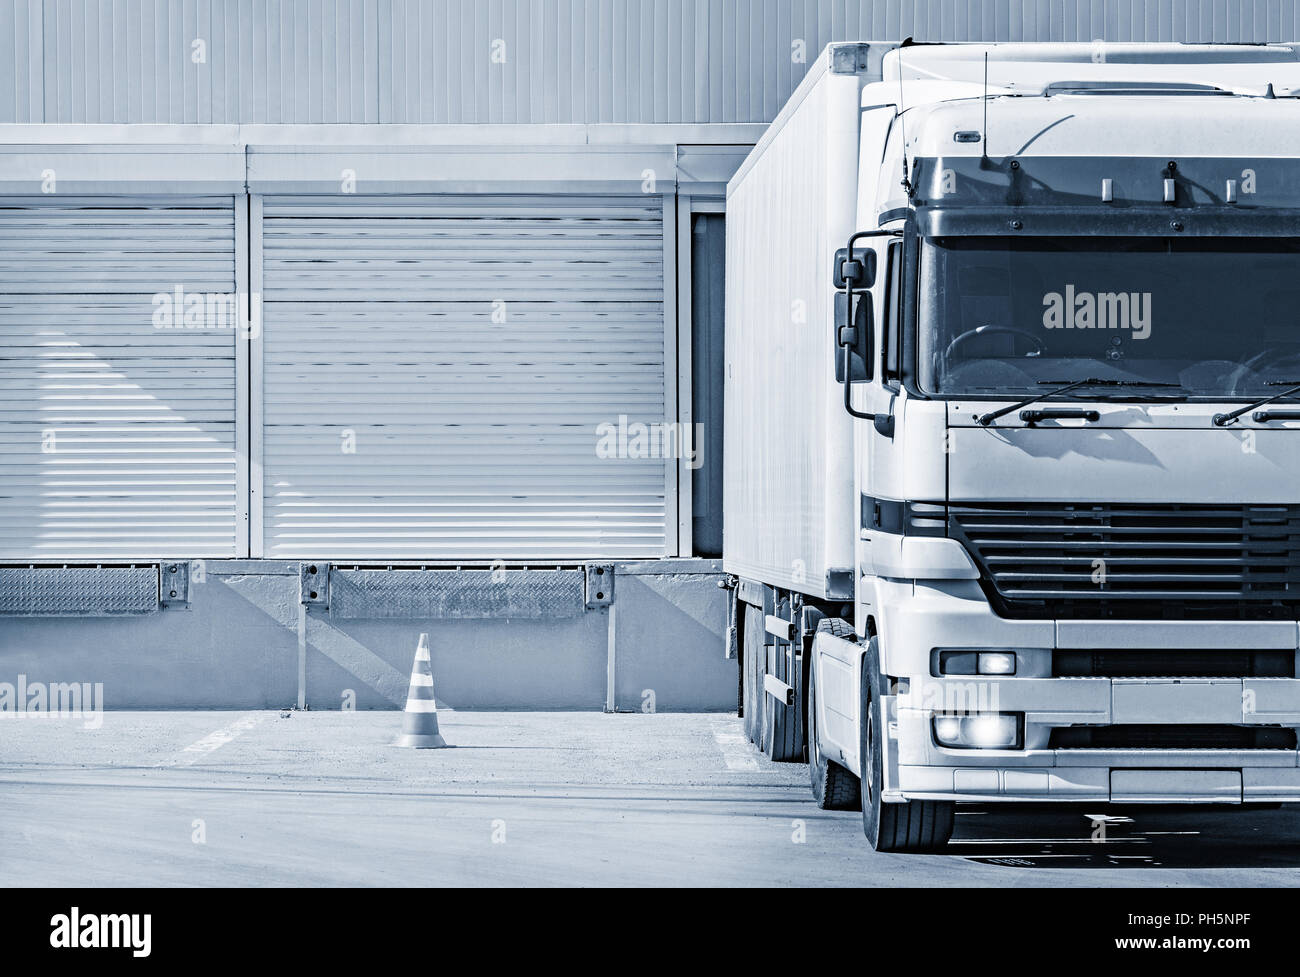 Freight truck stands by the door of the storage. Stock Photo